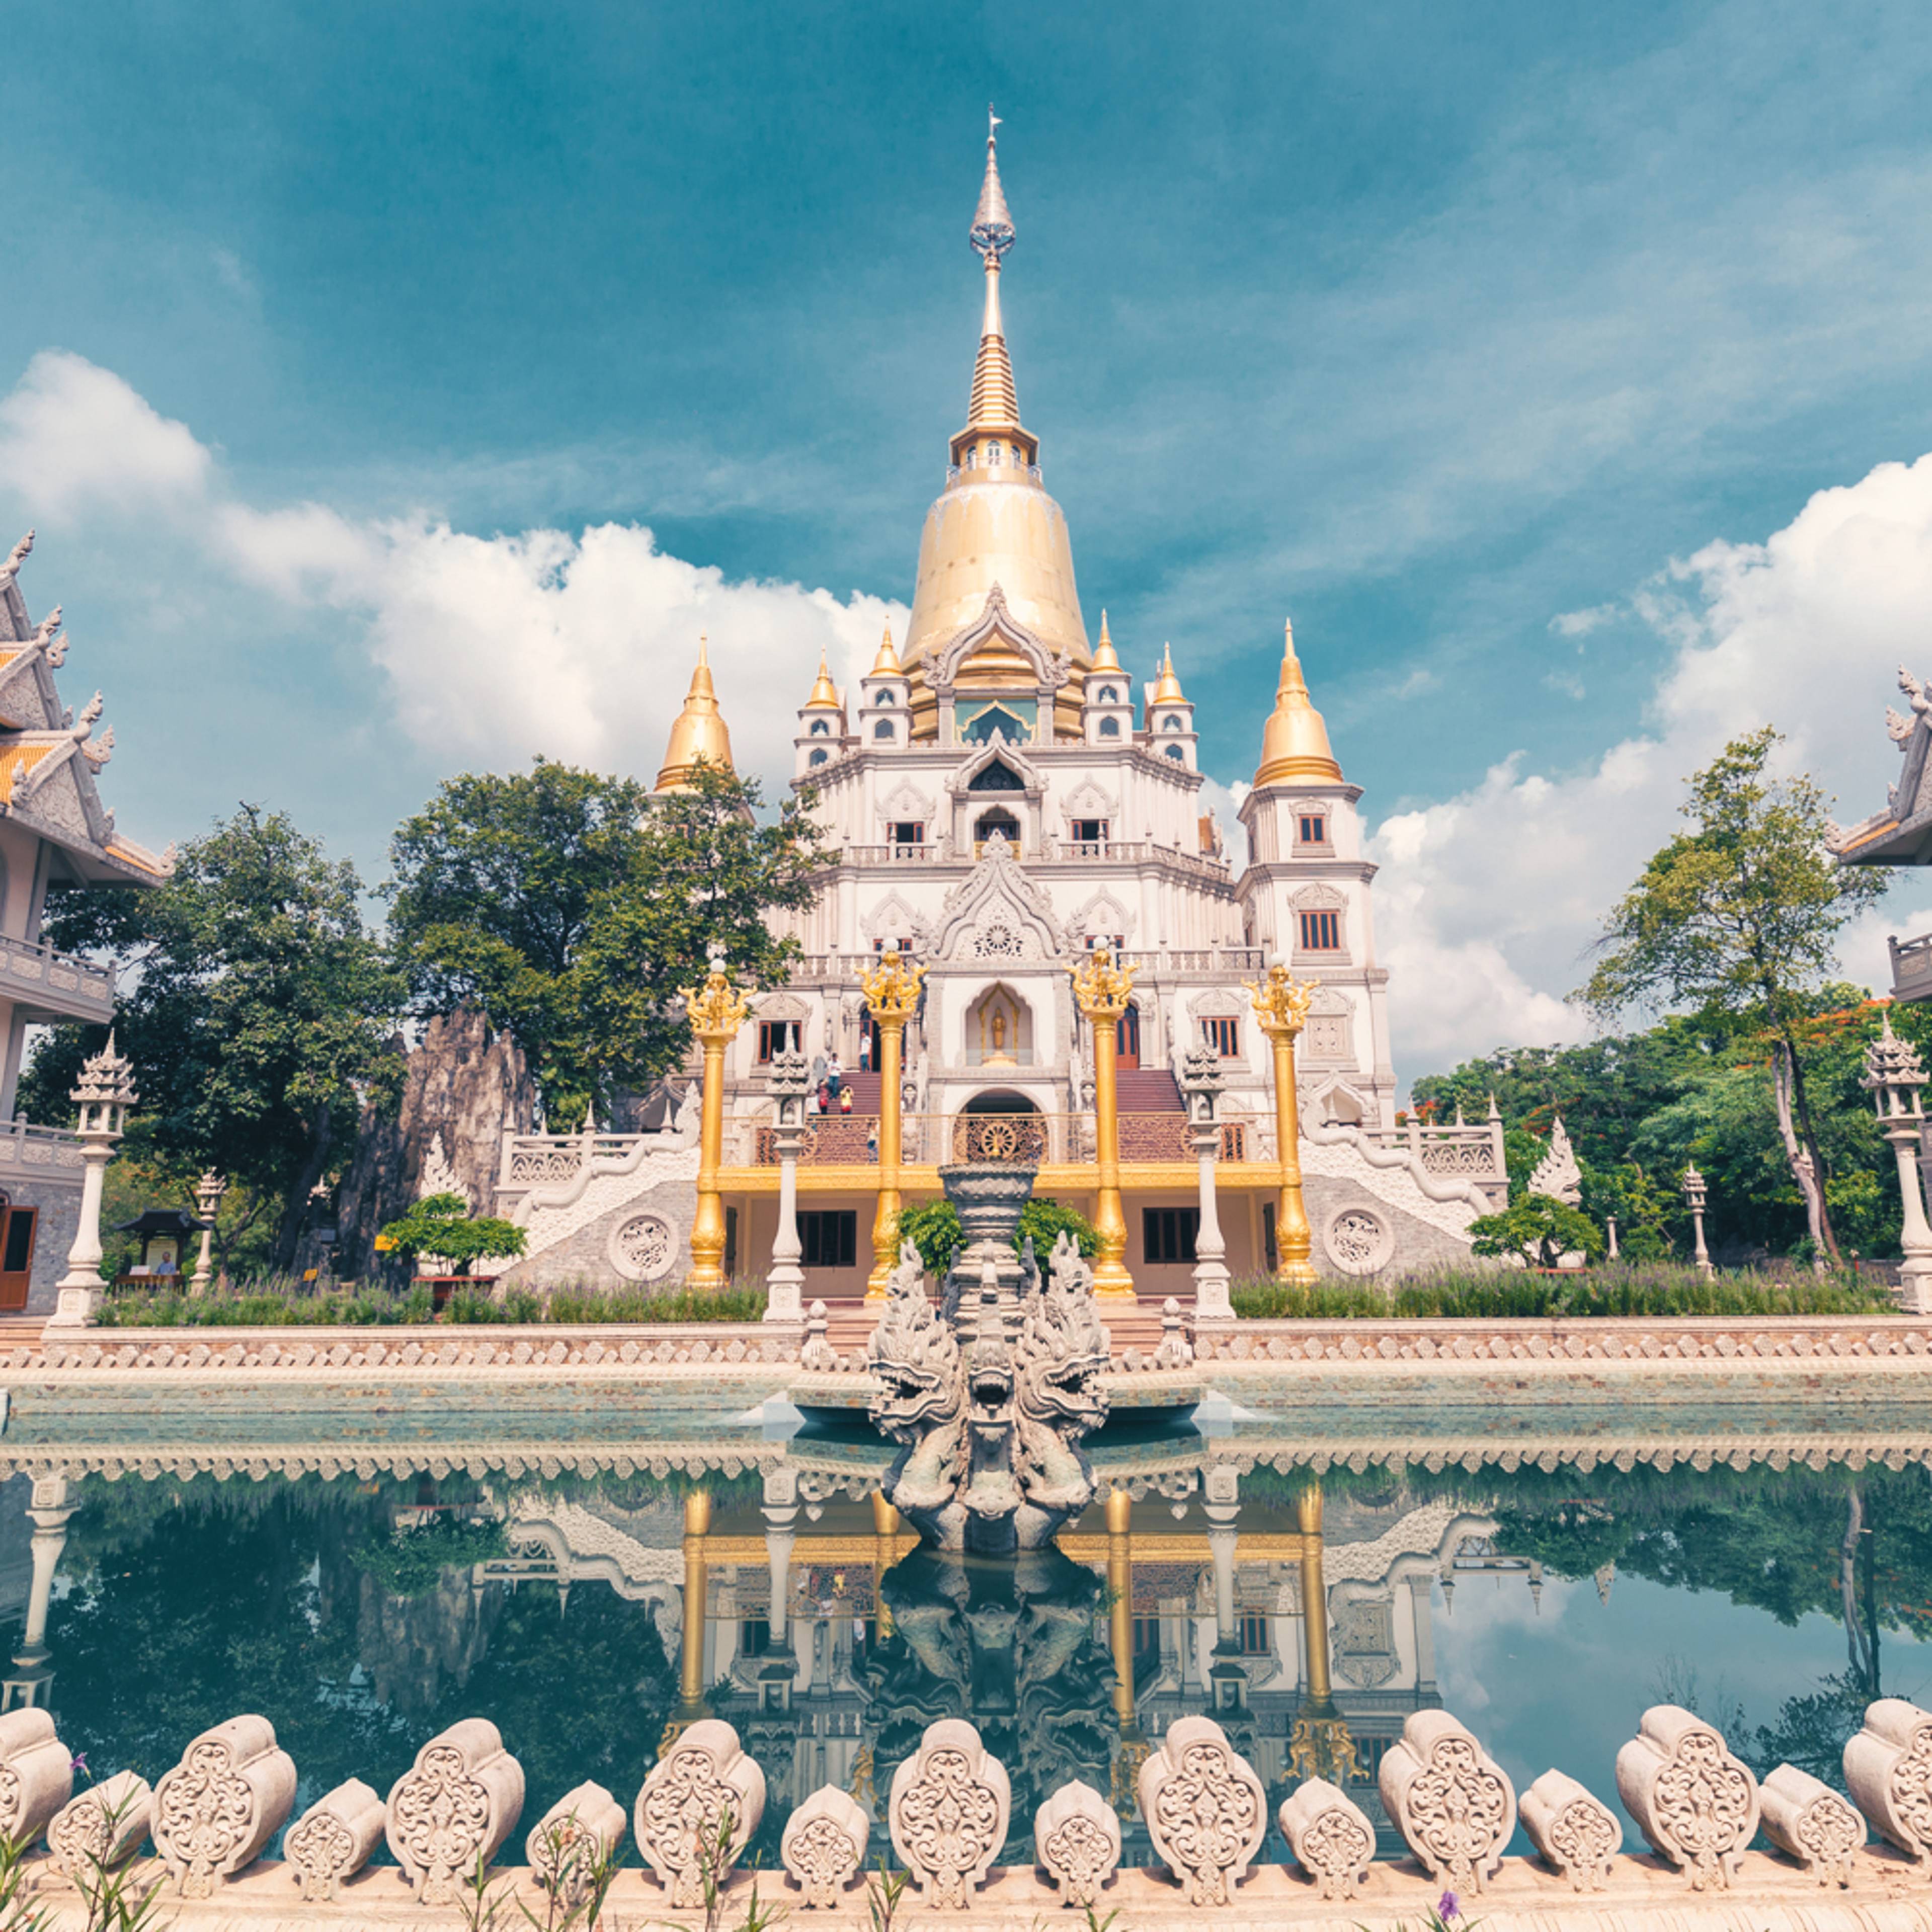 Design your perfect city tour with a local expert in Vietnam